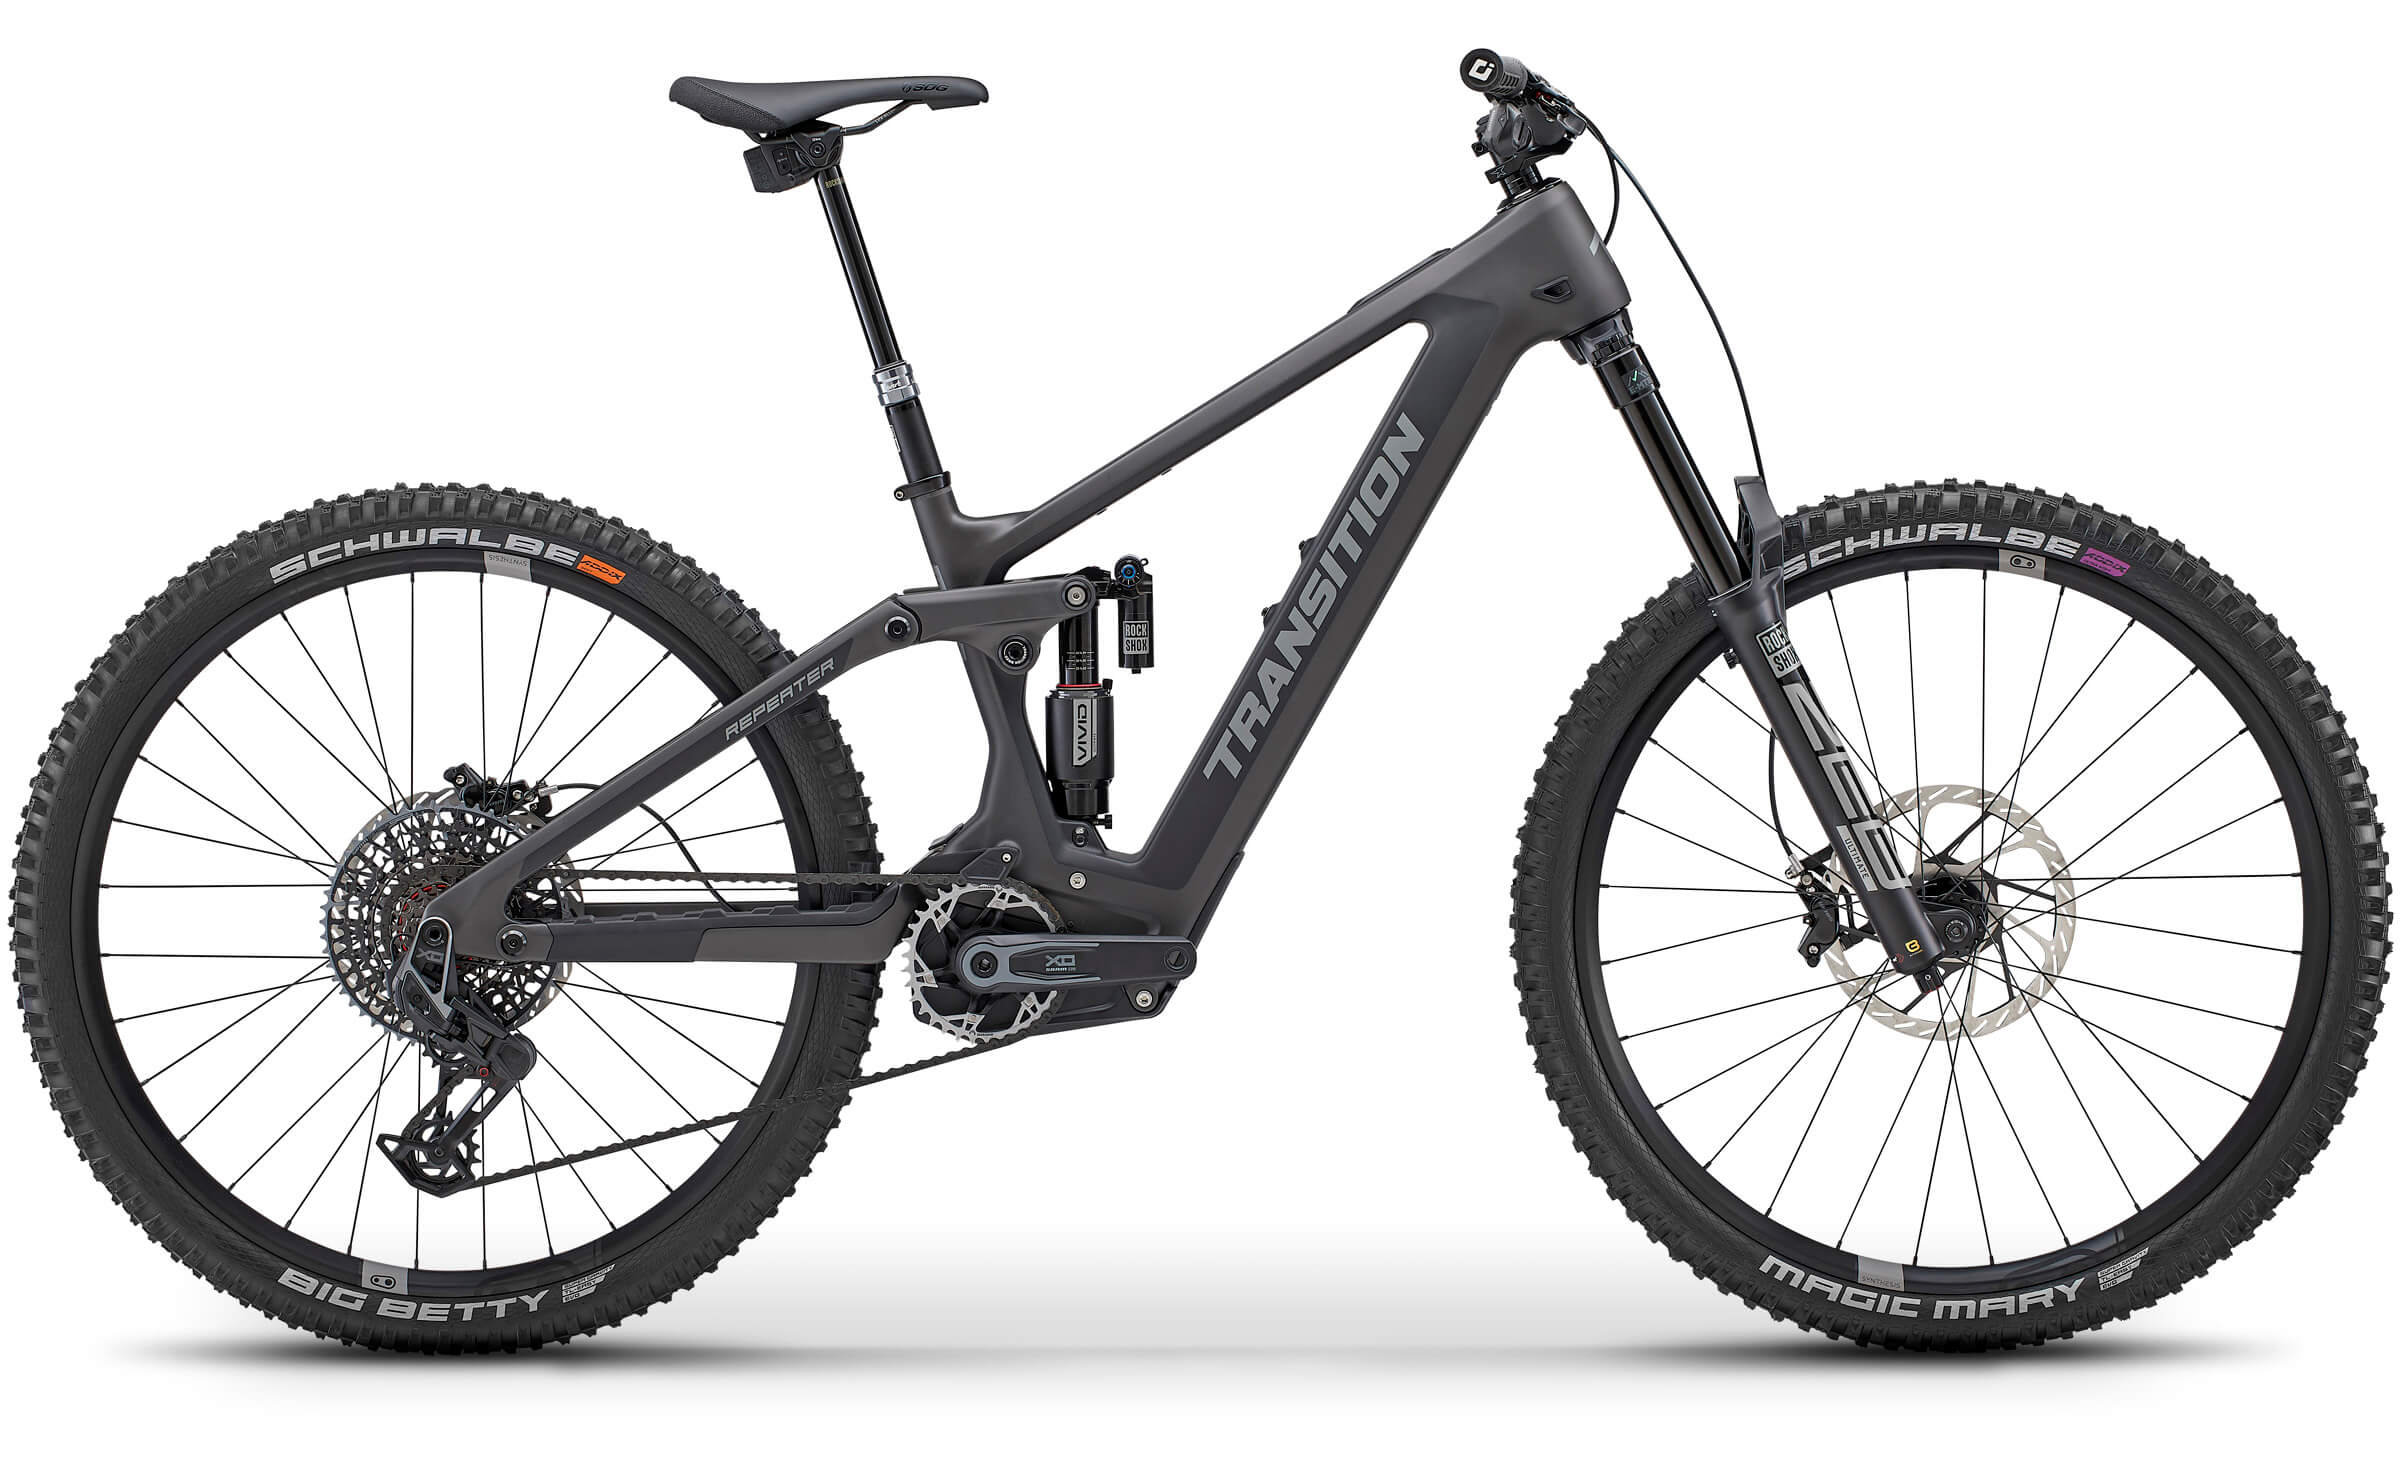 2021 Transition Spire Alloy GX - Specs, Reviews, Images - Mountain Bike  Database